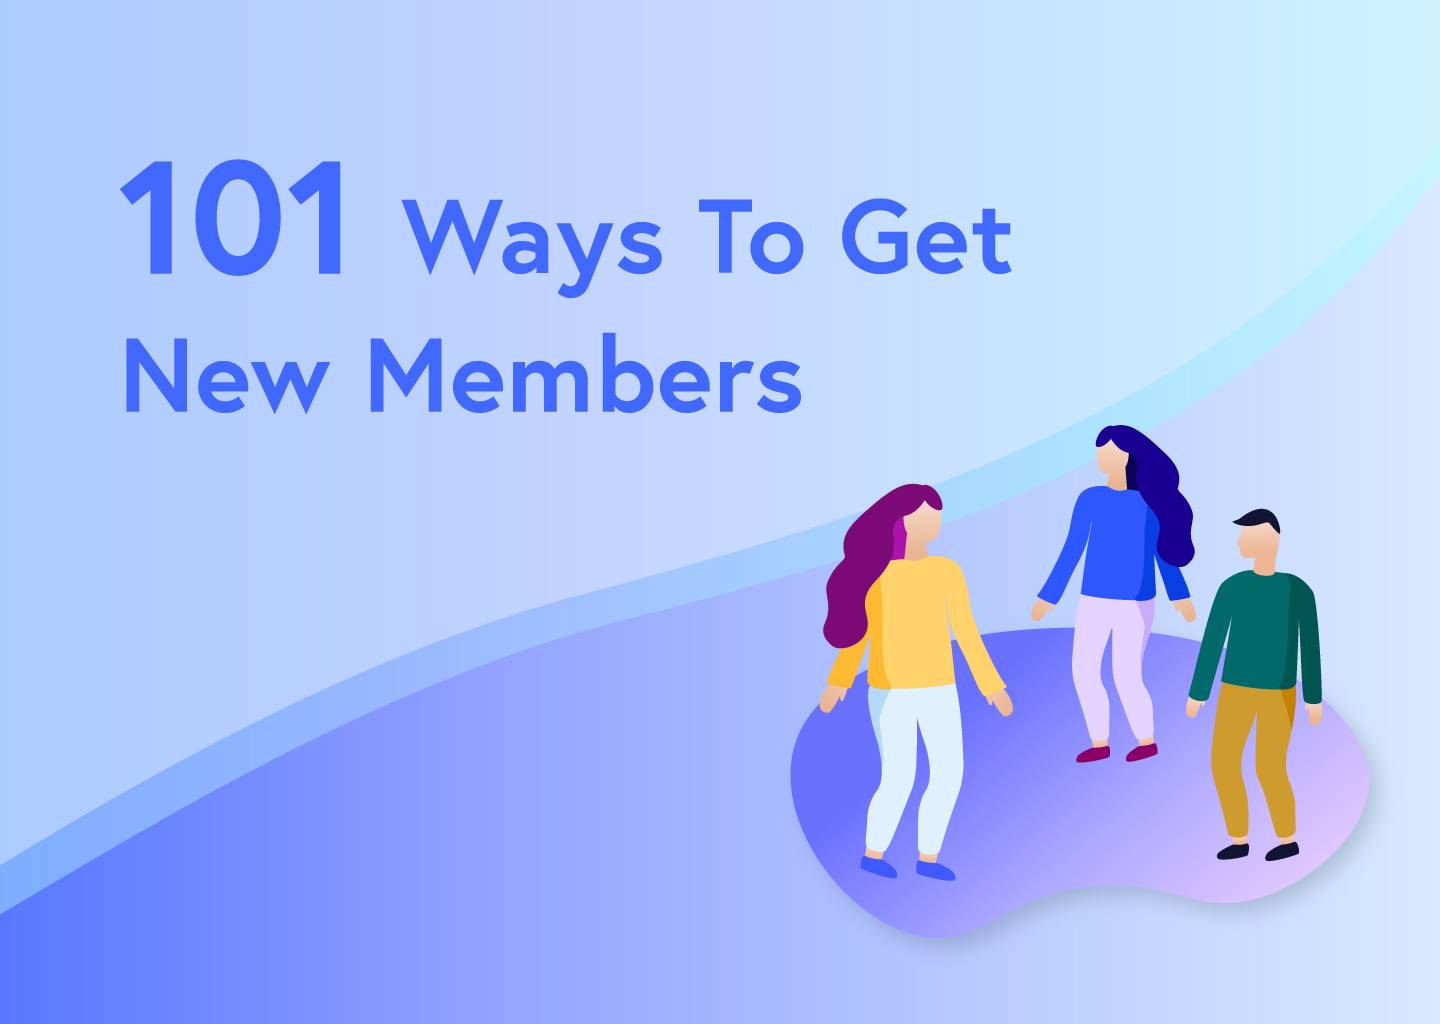 101 Ways To Get New Members For Your Organization